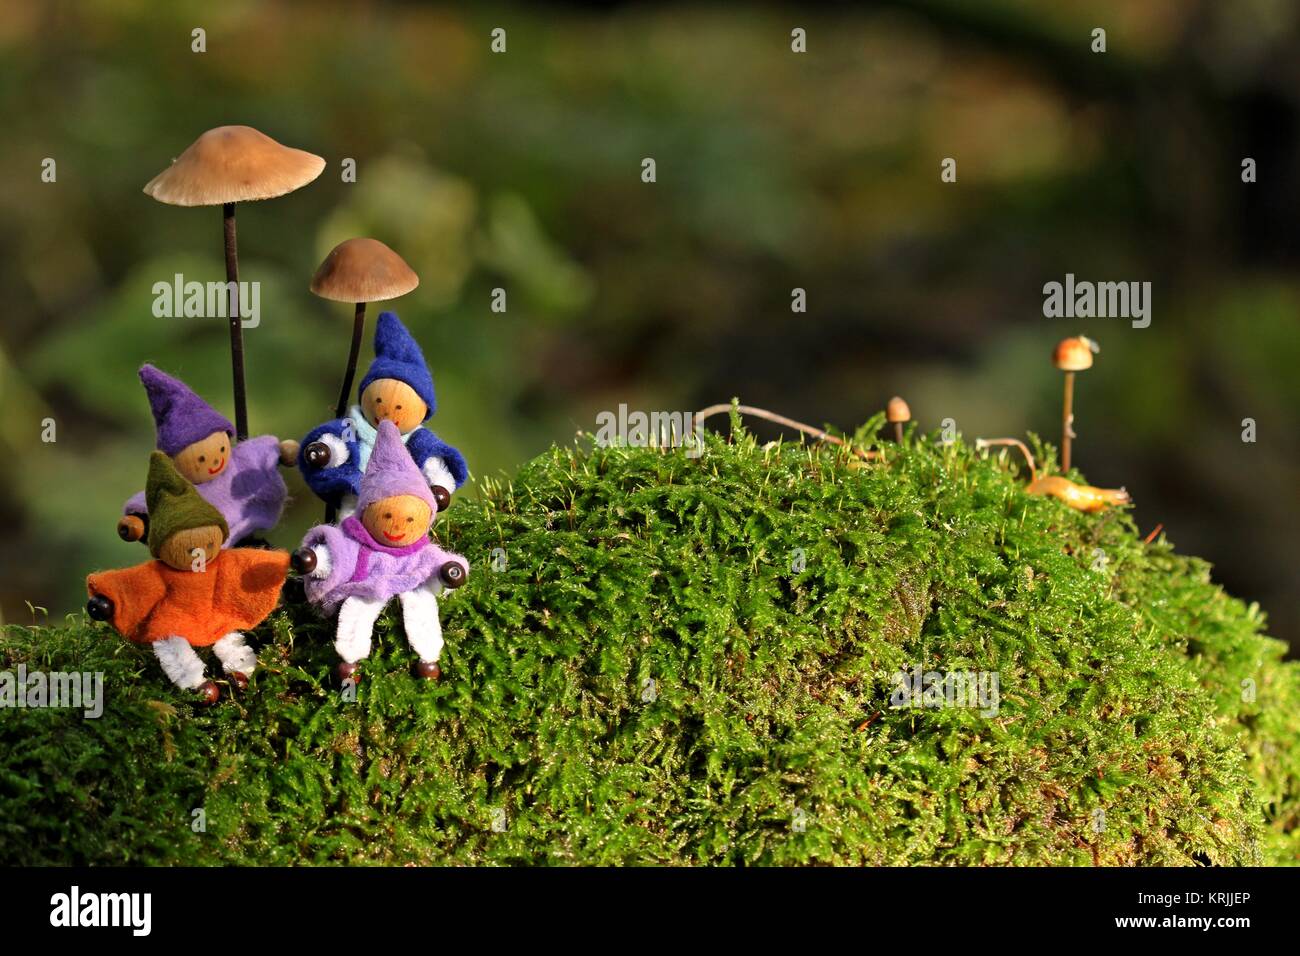 four little gnomes are sitting in the moss under mushrooms Stock Photo